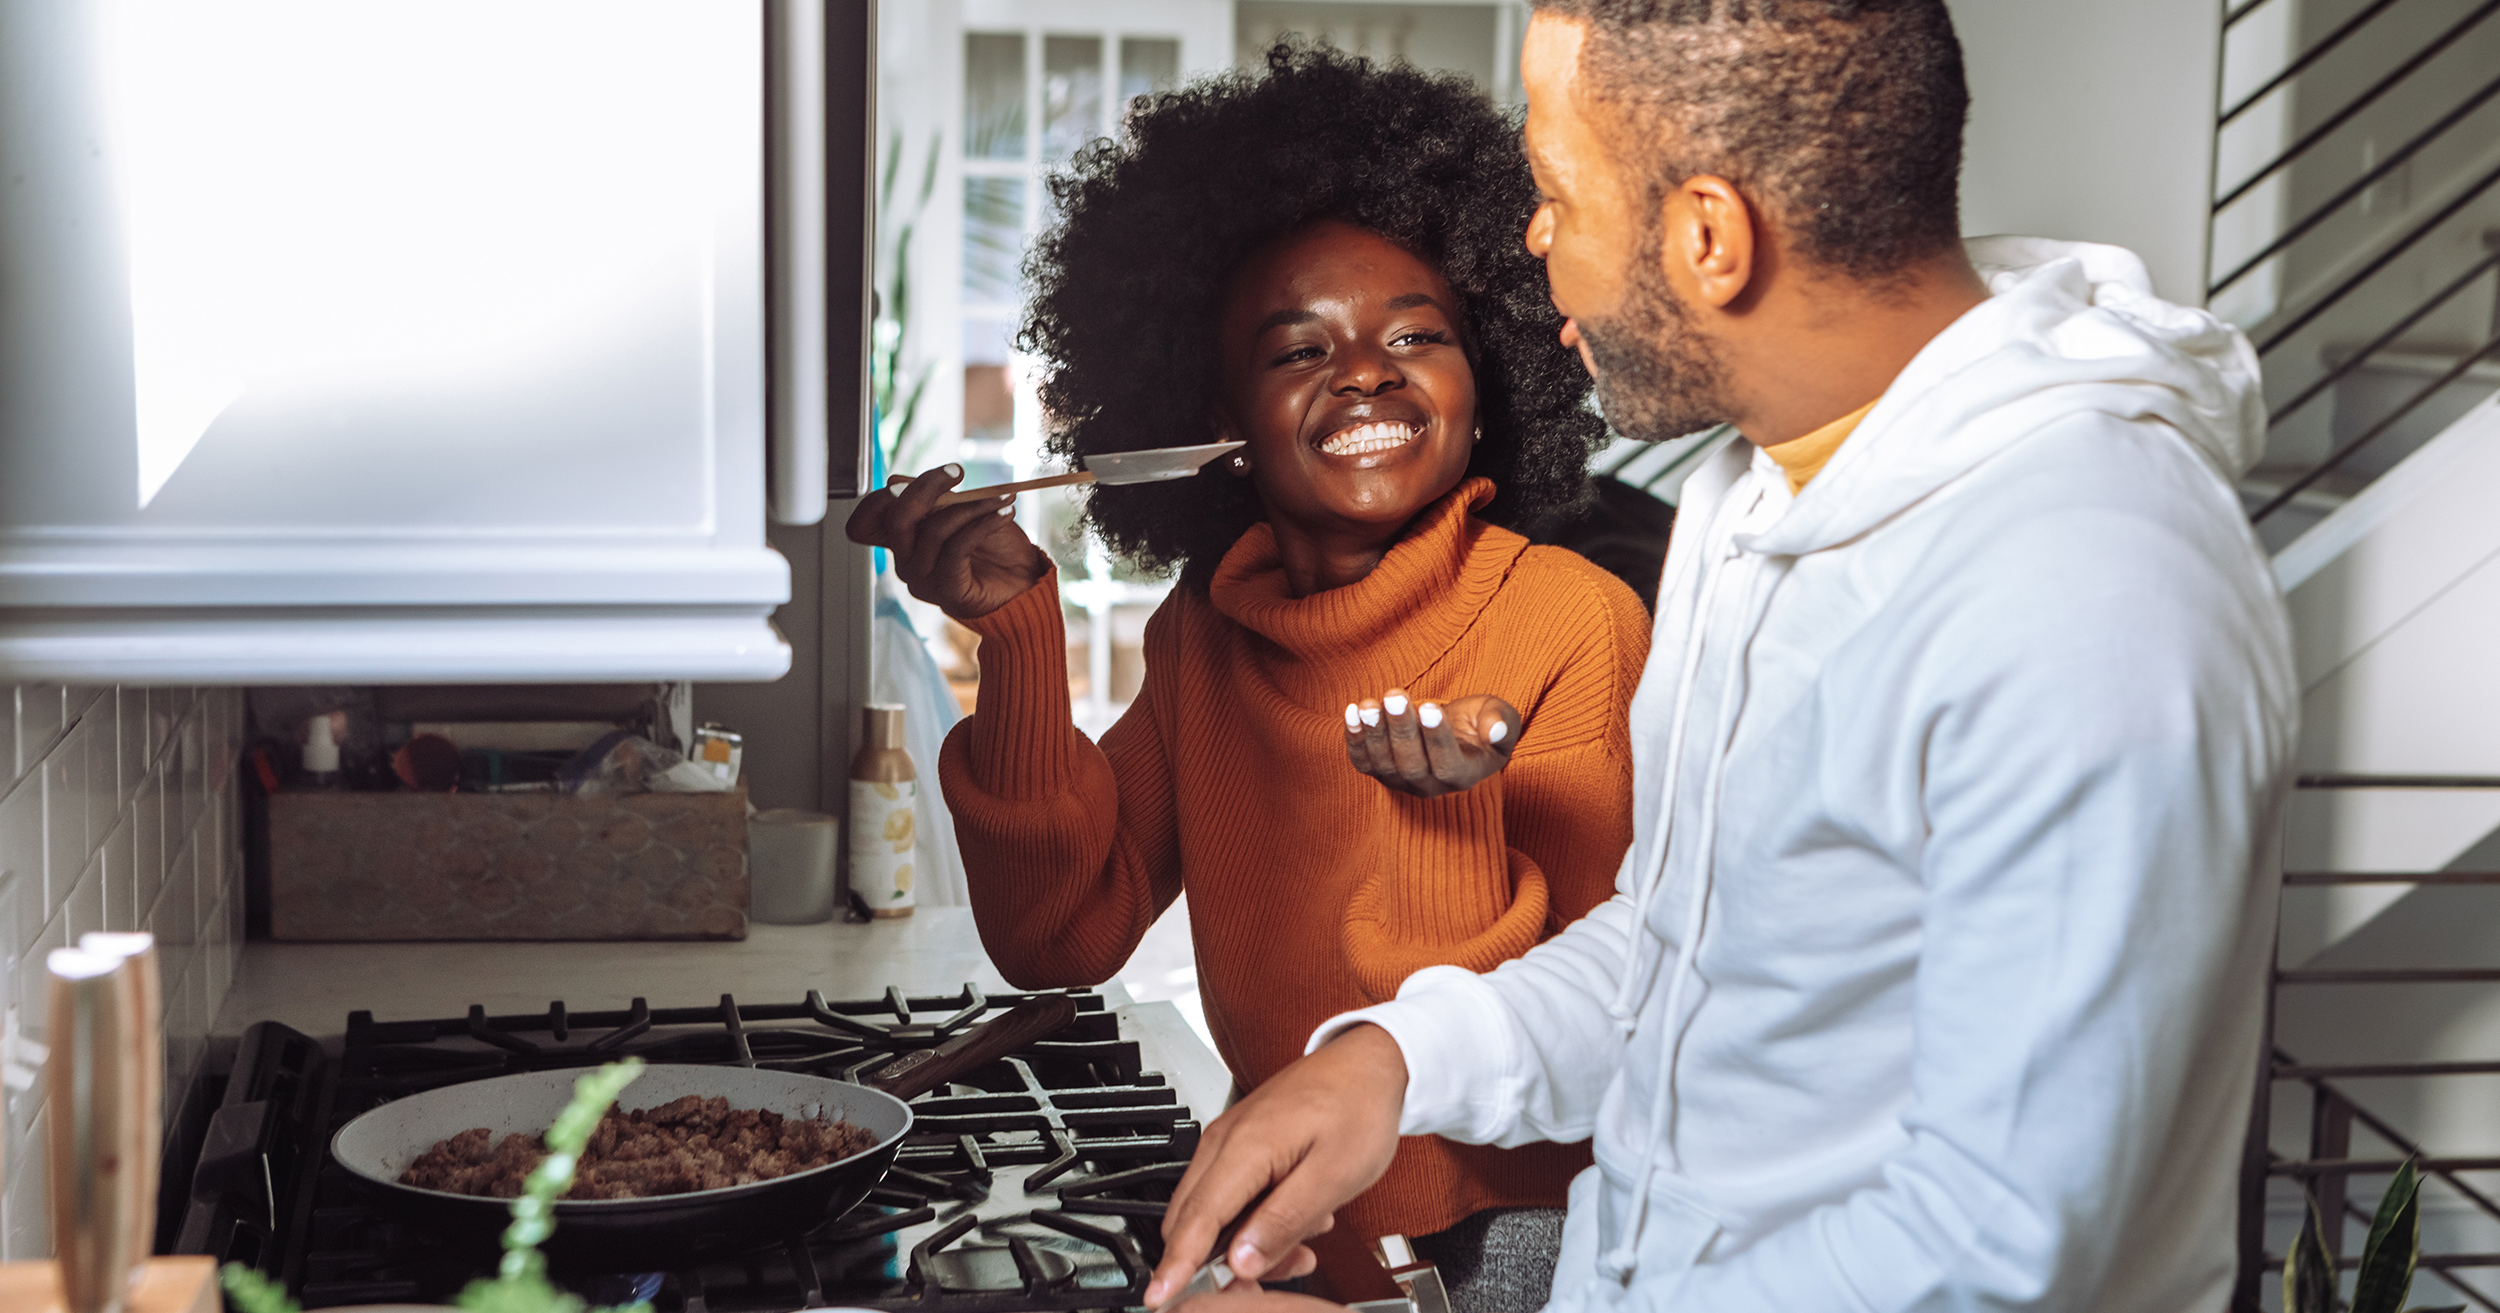 Benefits of cooking as a couple